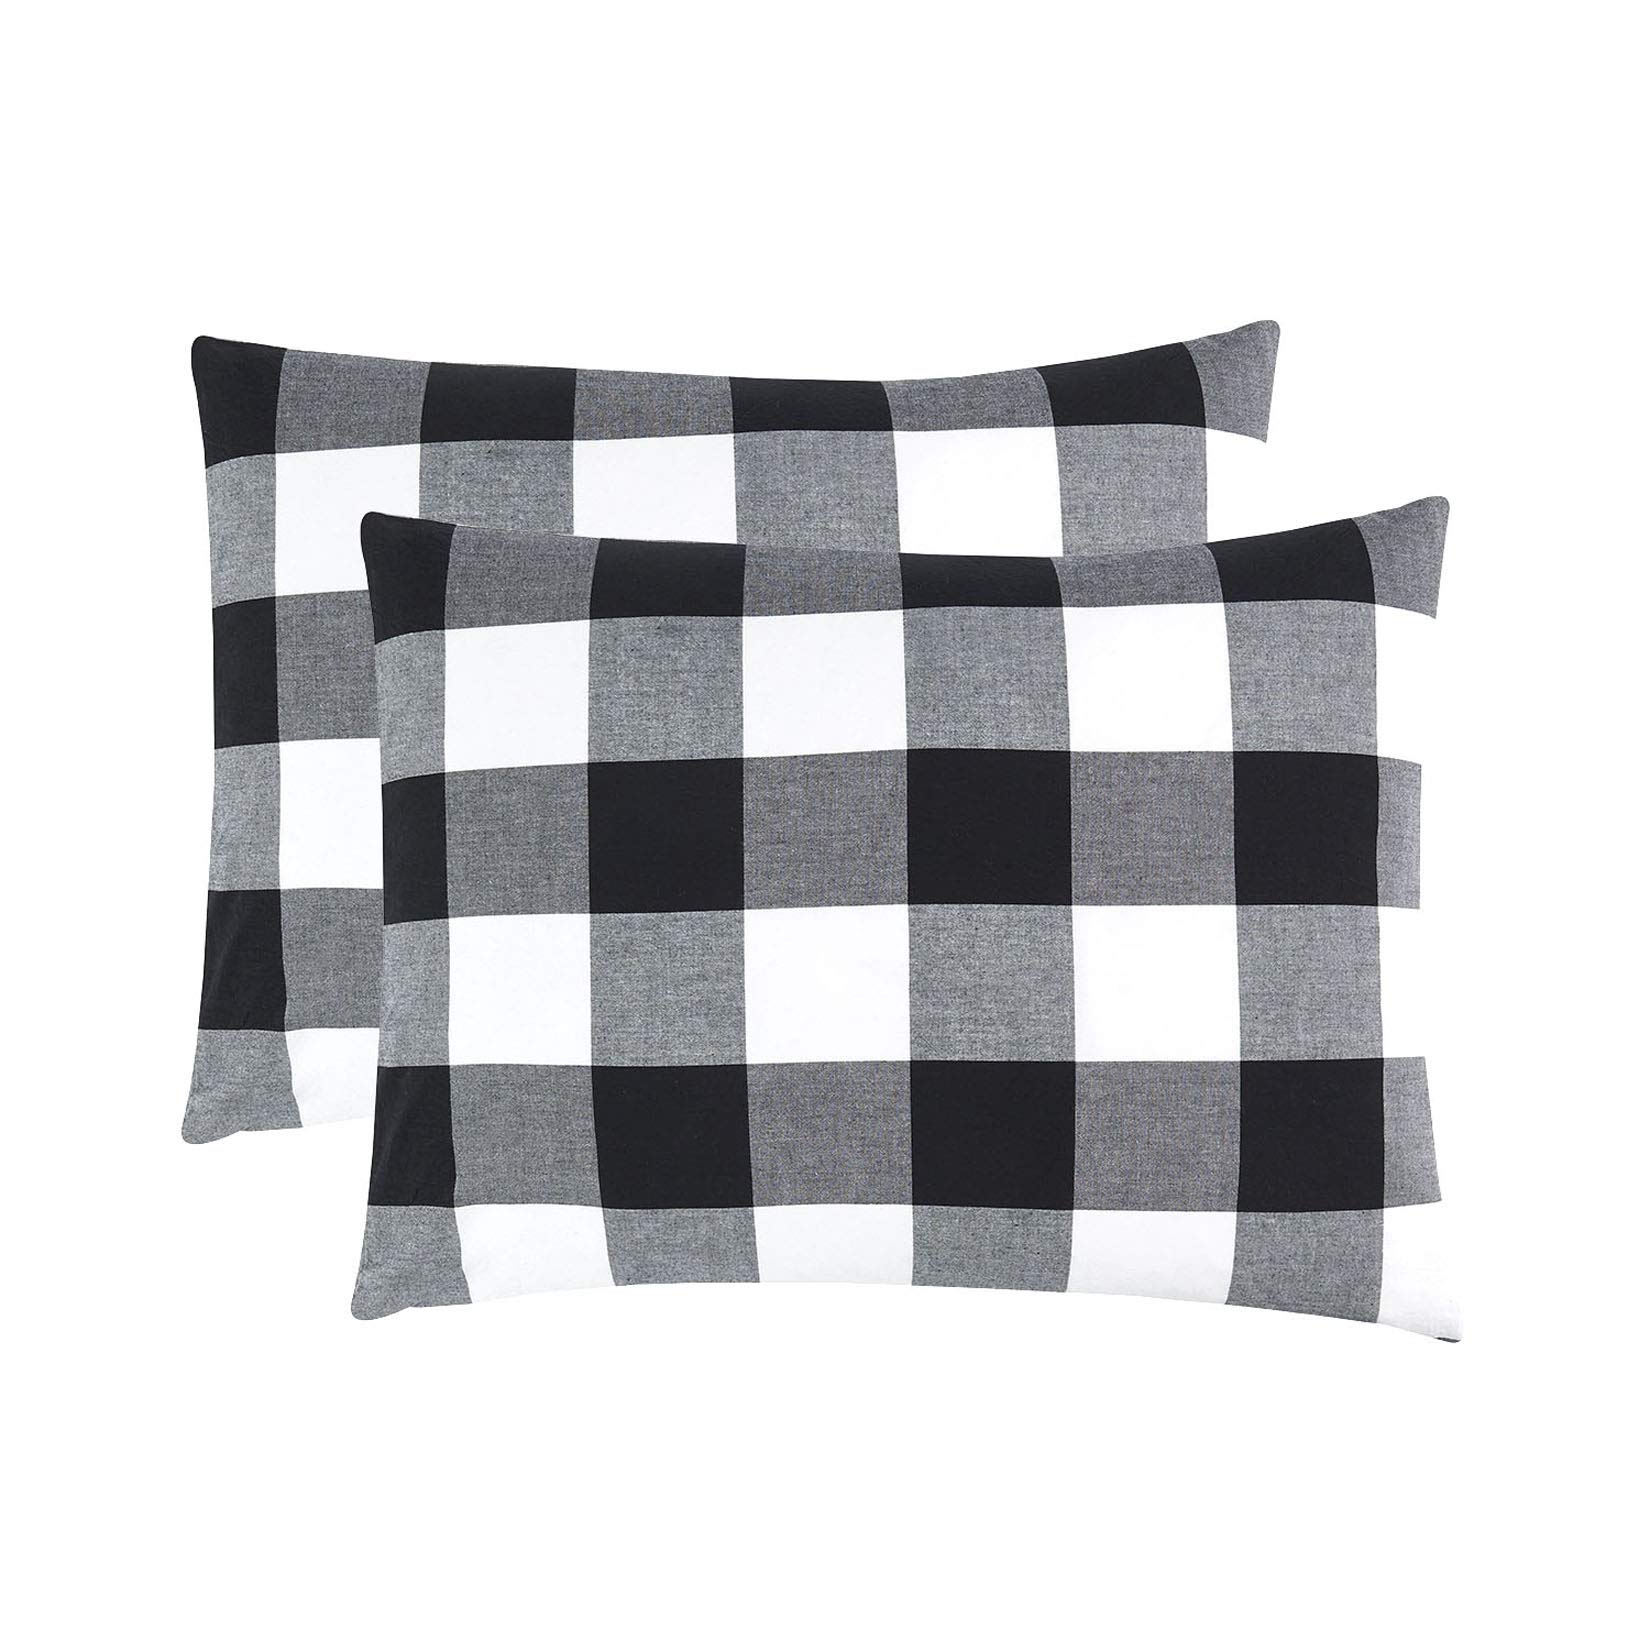 Book Cover Wake In Cloud - Pack of 2 Pillow Cases, 100% Washed Cotton Pillowcases, Buffalo Check Gingham Plaid Geometric Checker in White Black Gray (Standard Size, 20x26 Inches) Standard (20